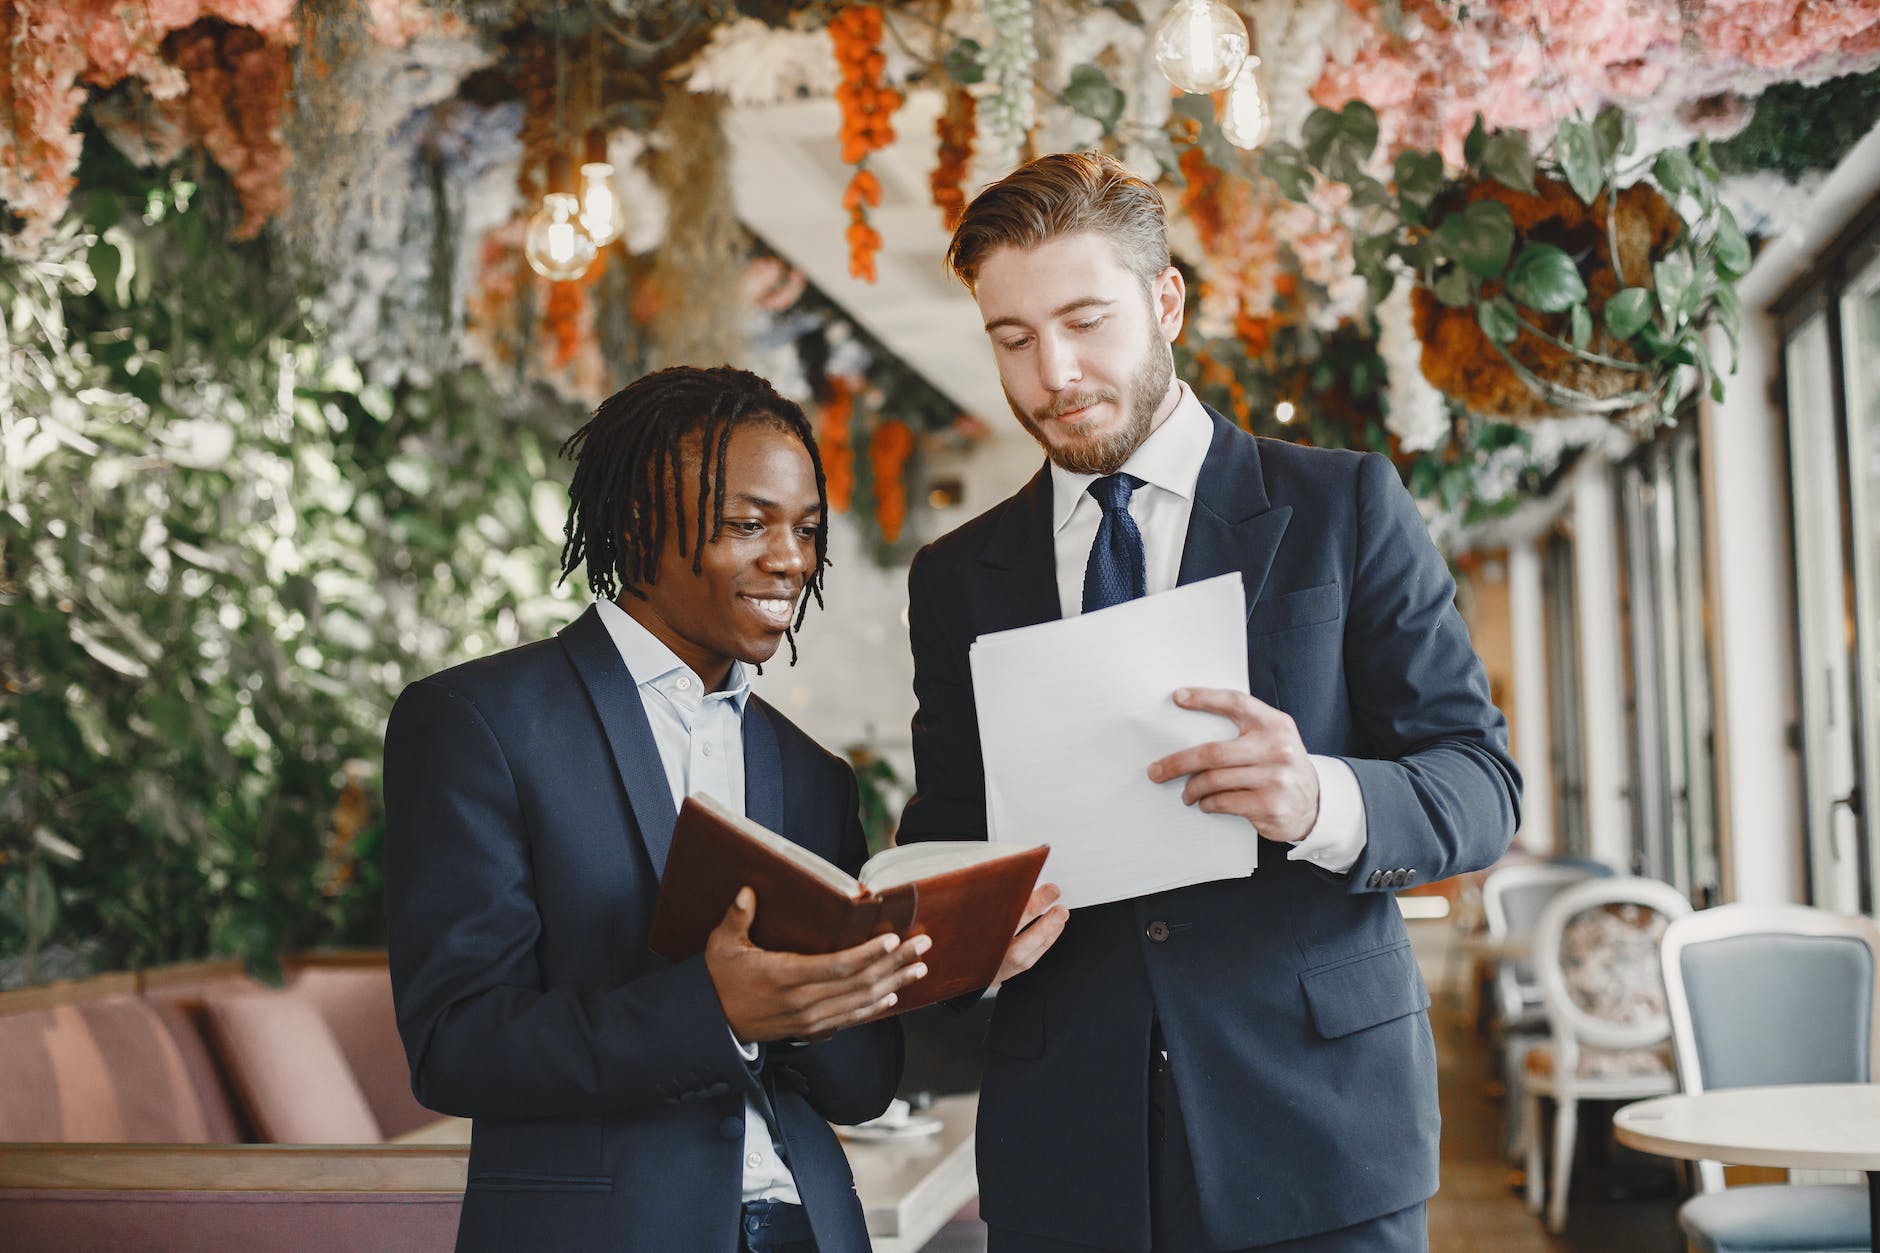 men in suits holding papers and notebooks in a wedding reception venue